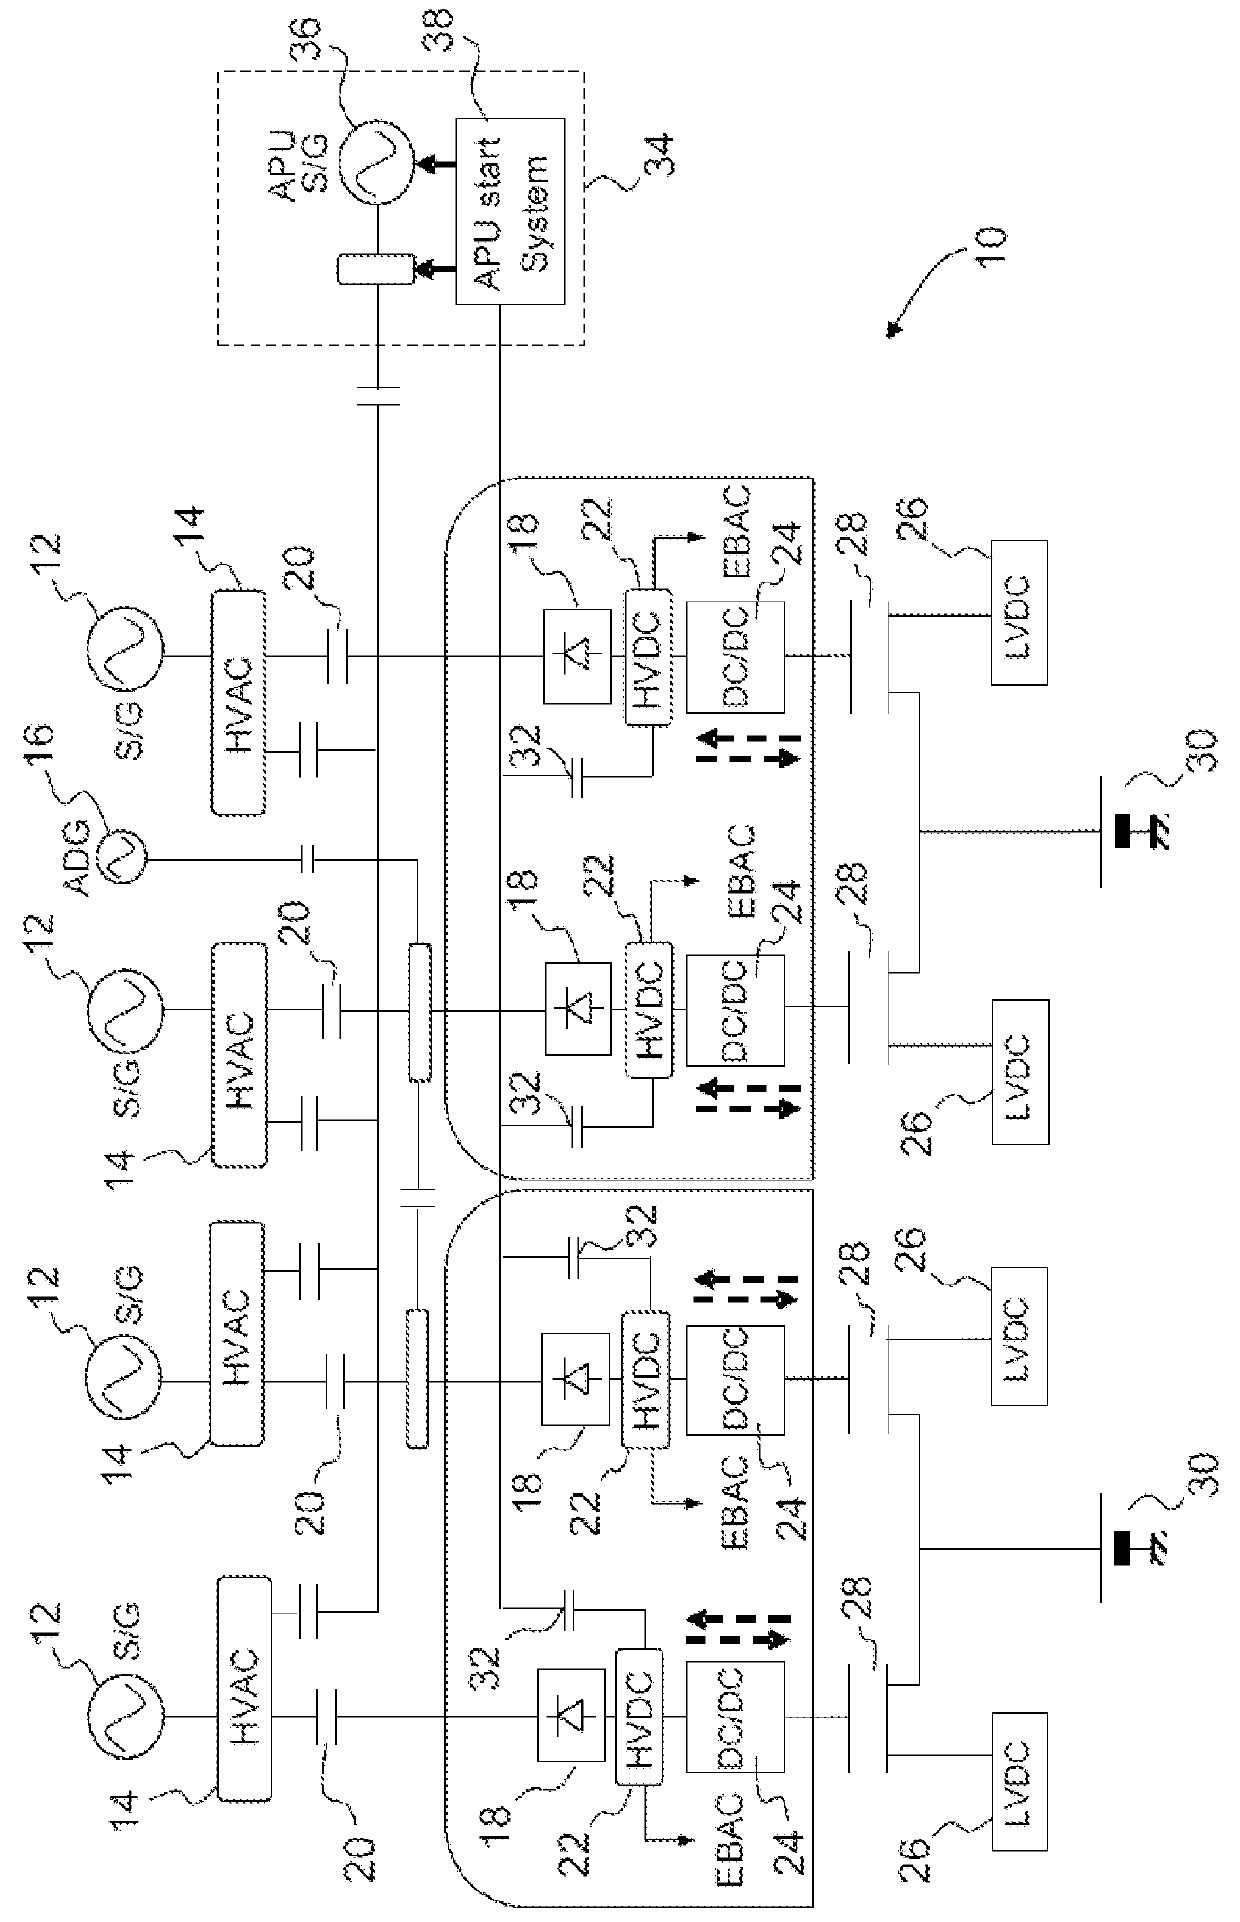 Electrical network of an aircraft